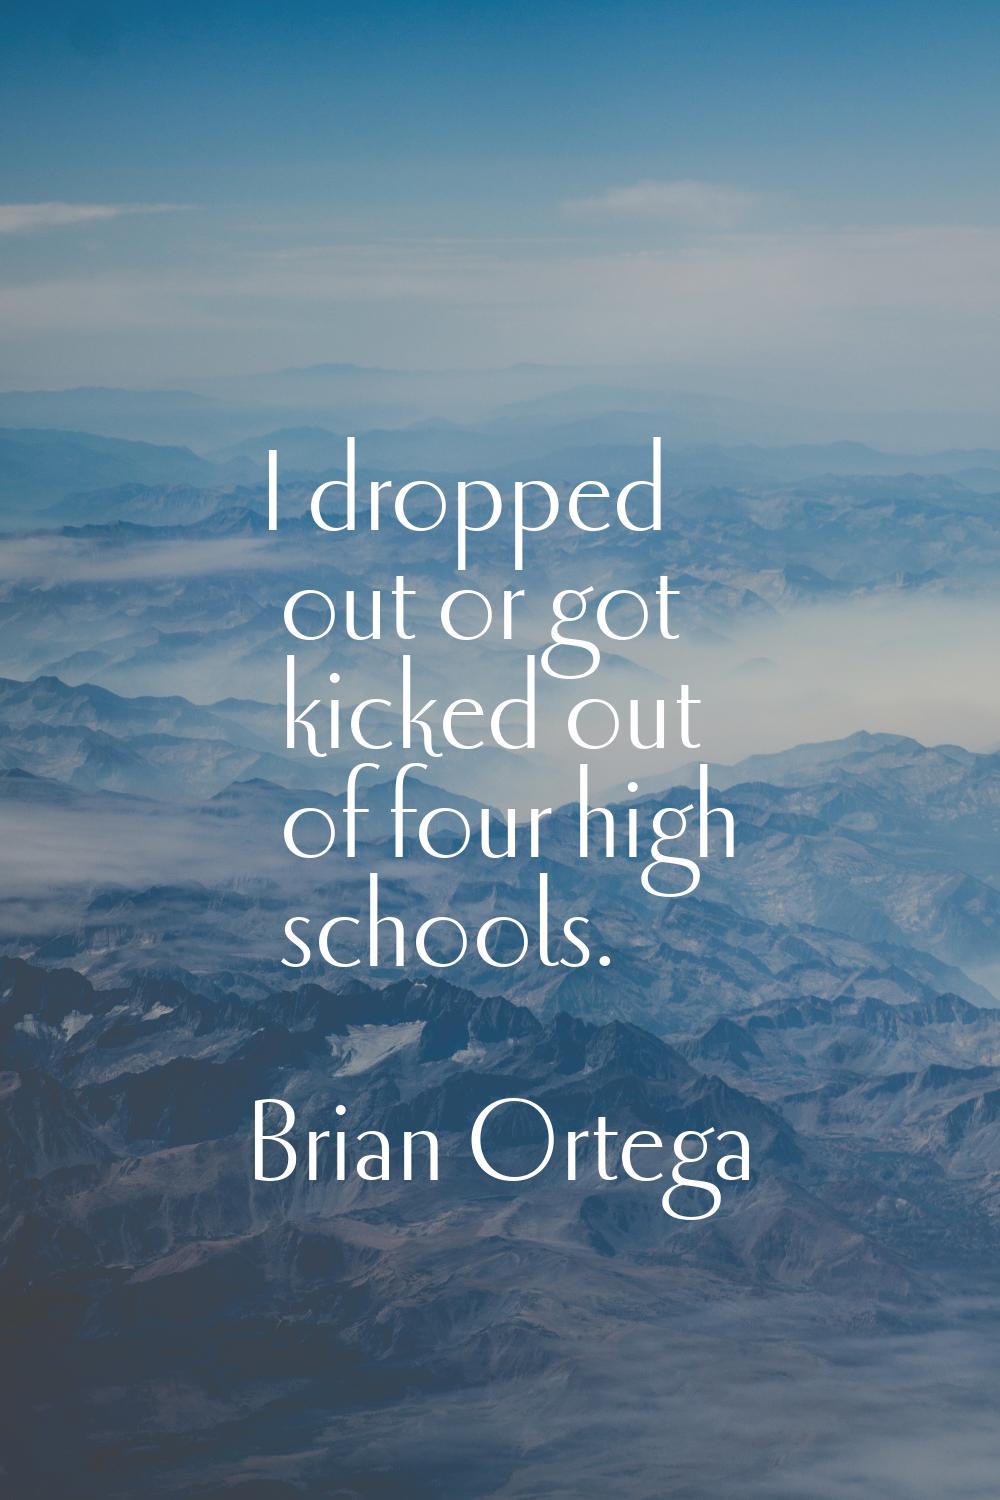 I dropped out or got kicked out of four high schools.